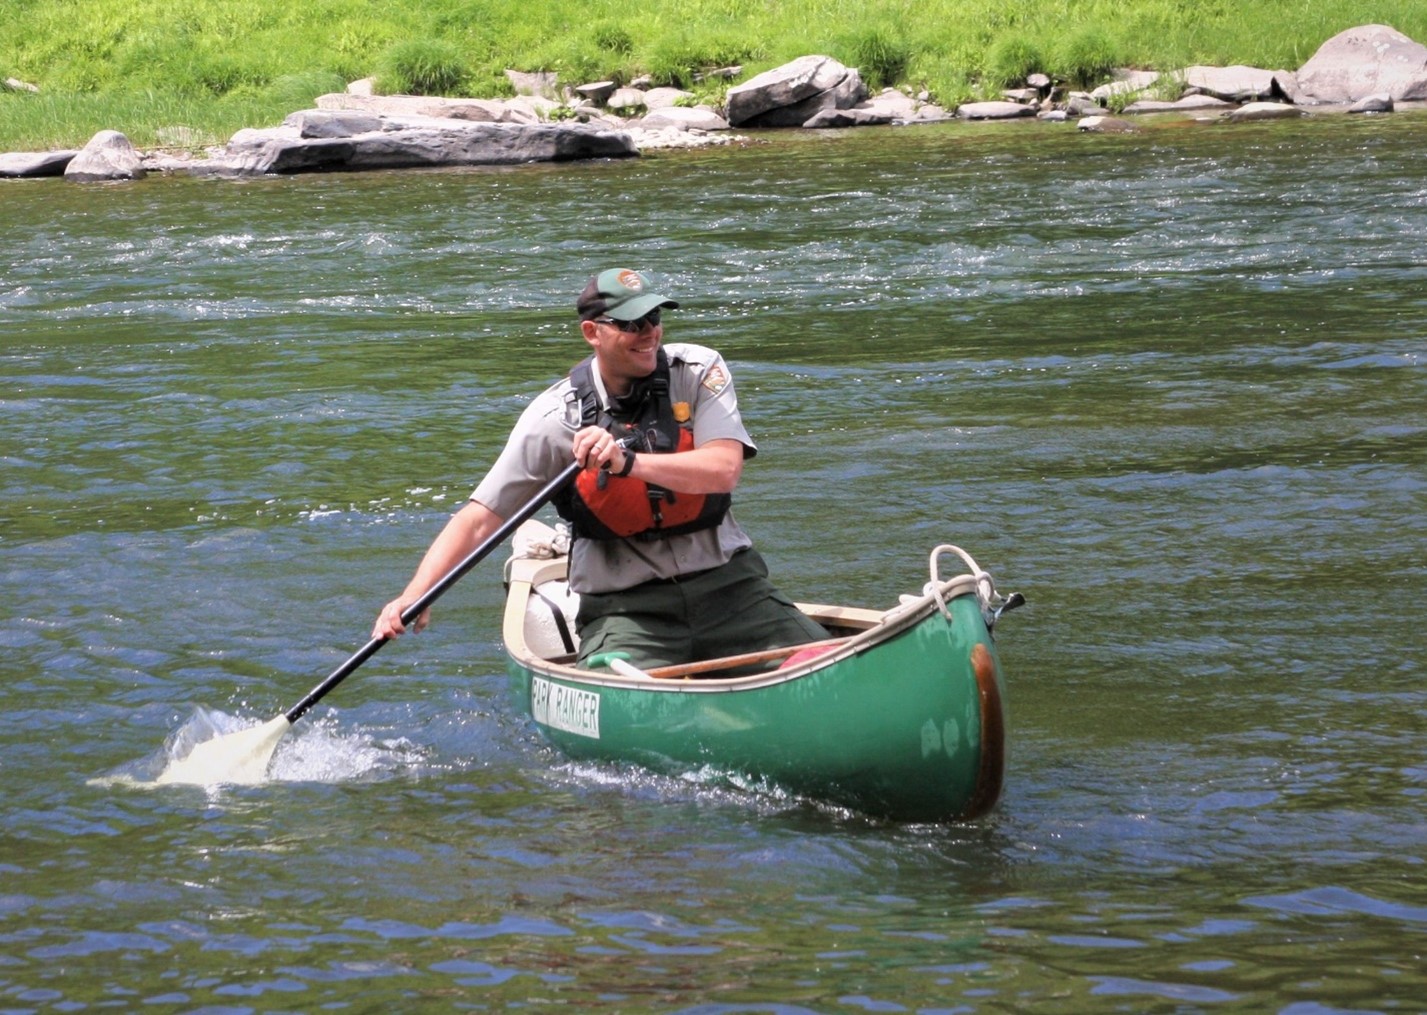 Photo of a uniformed park ranger smiling and paddling a green canoe in a river